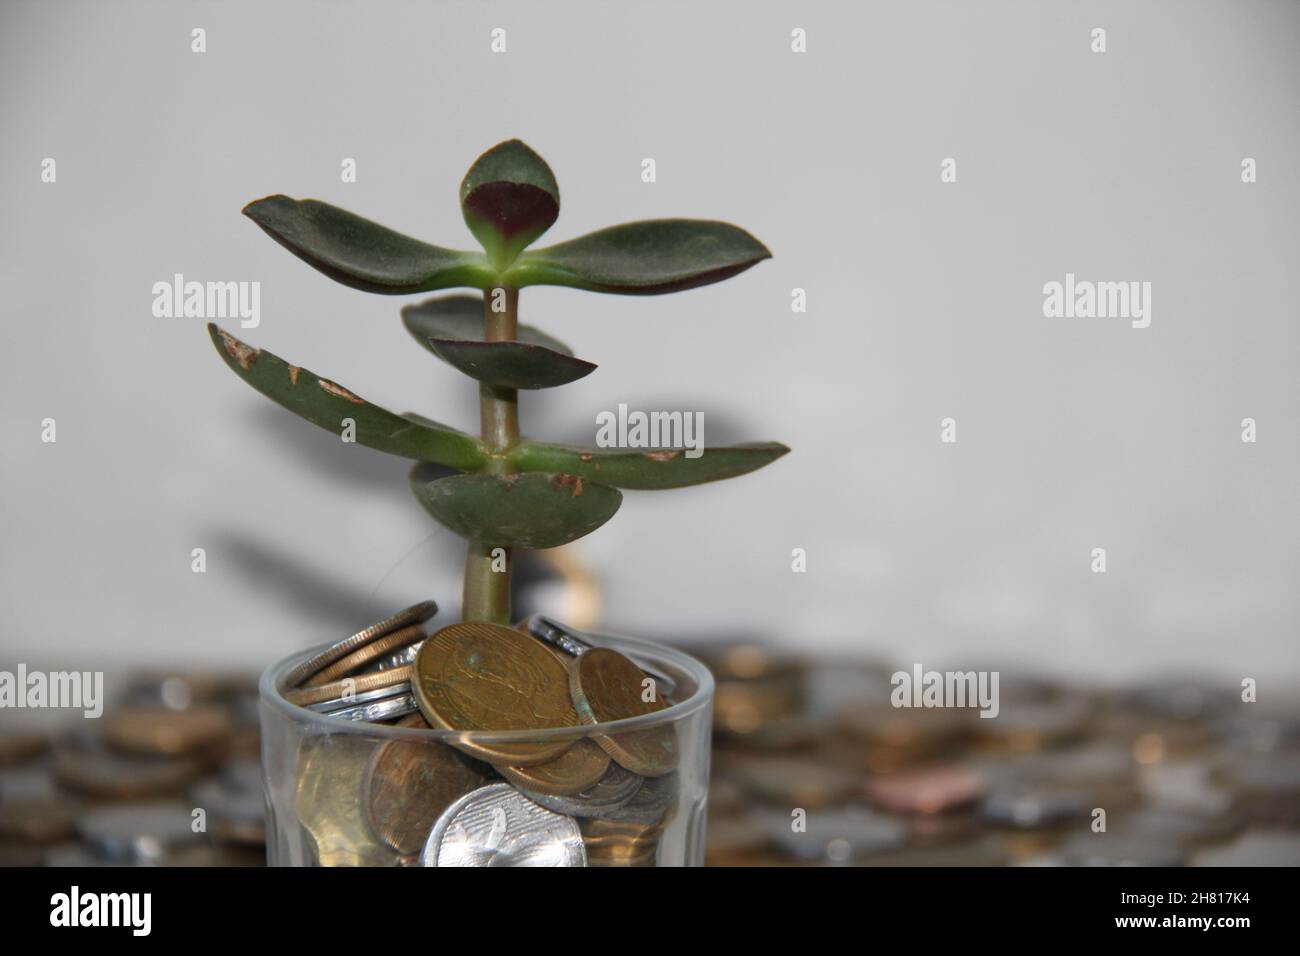 Glass vase with a jade plant and blurred background coins on a wooden table. Stock Photo